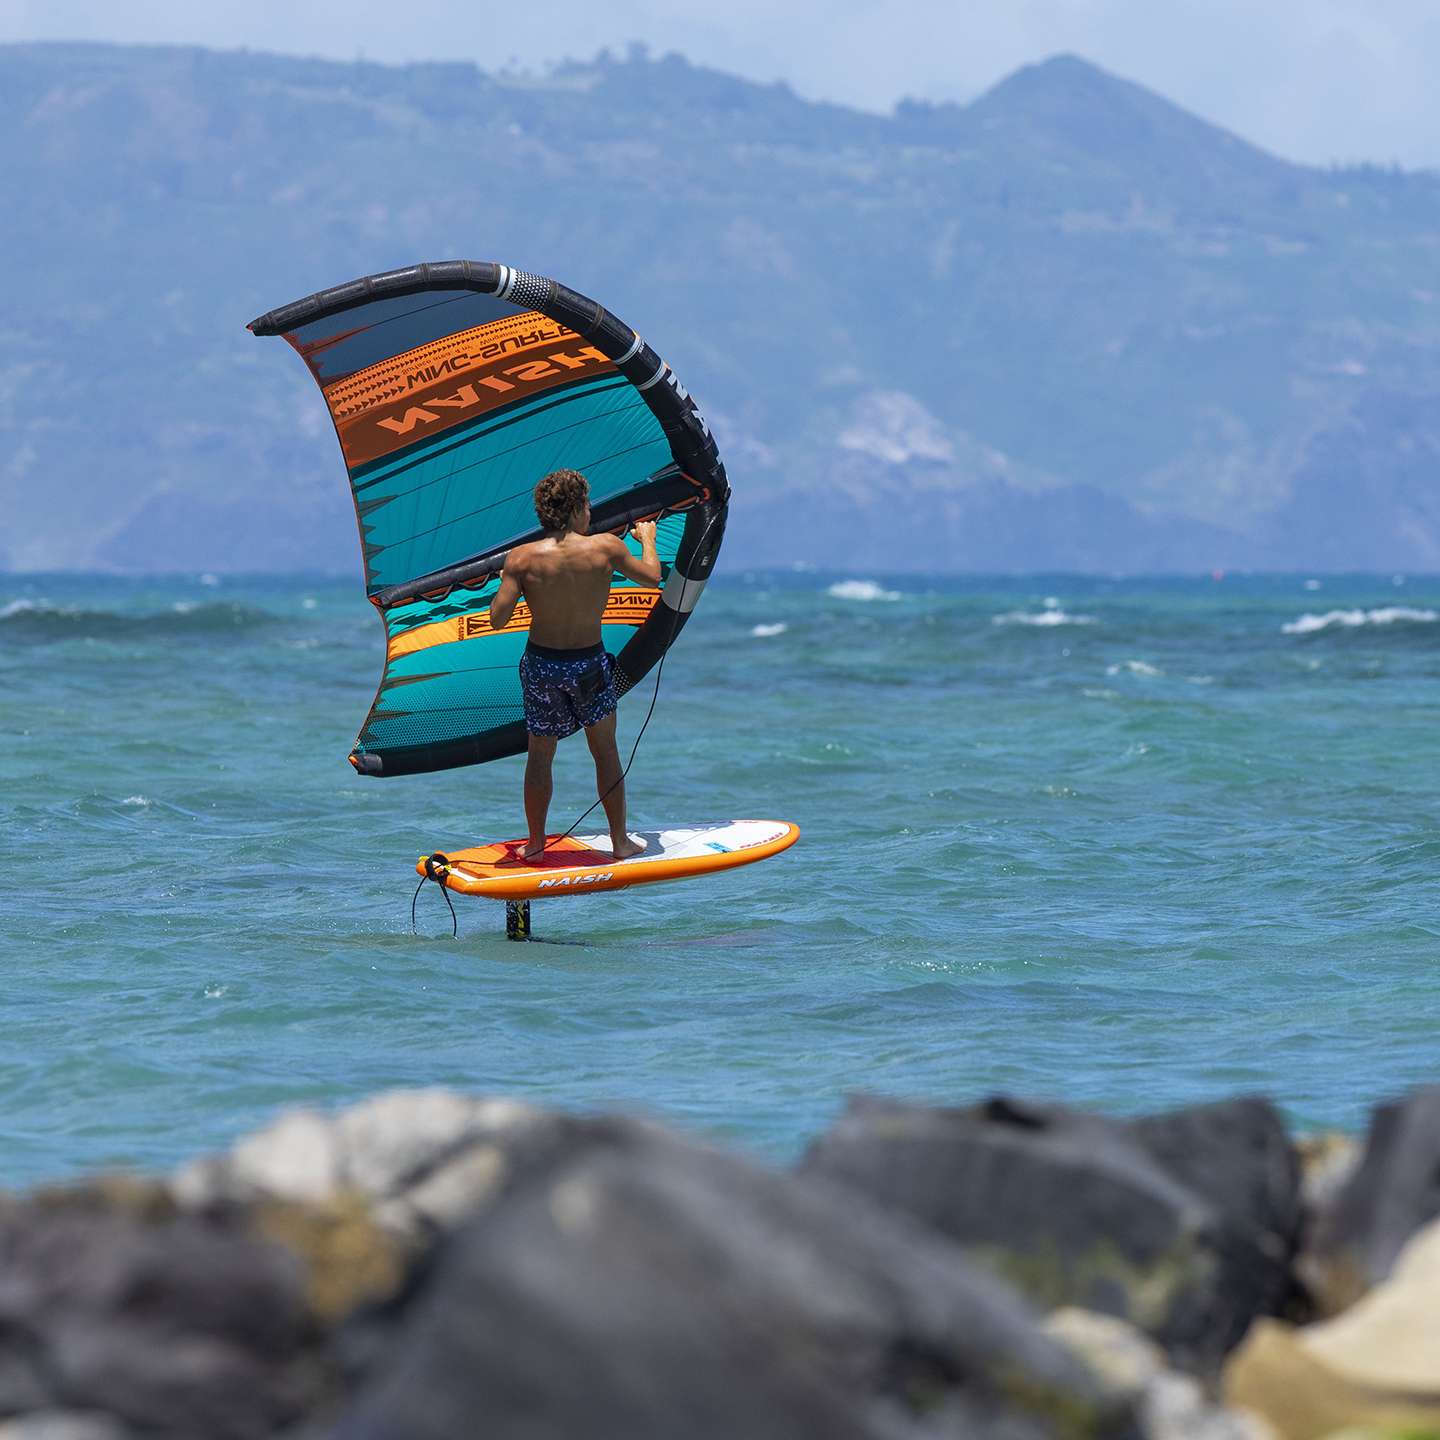 Naish inflatable wing-surfer: The crazy water toy you didn't know